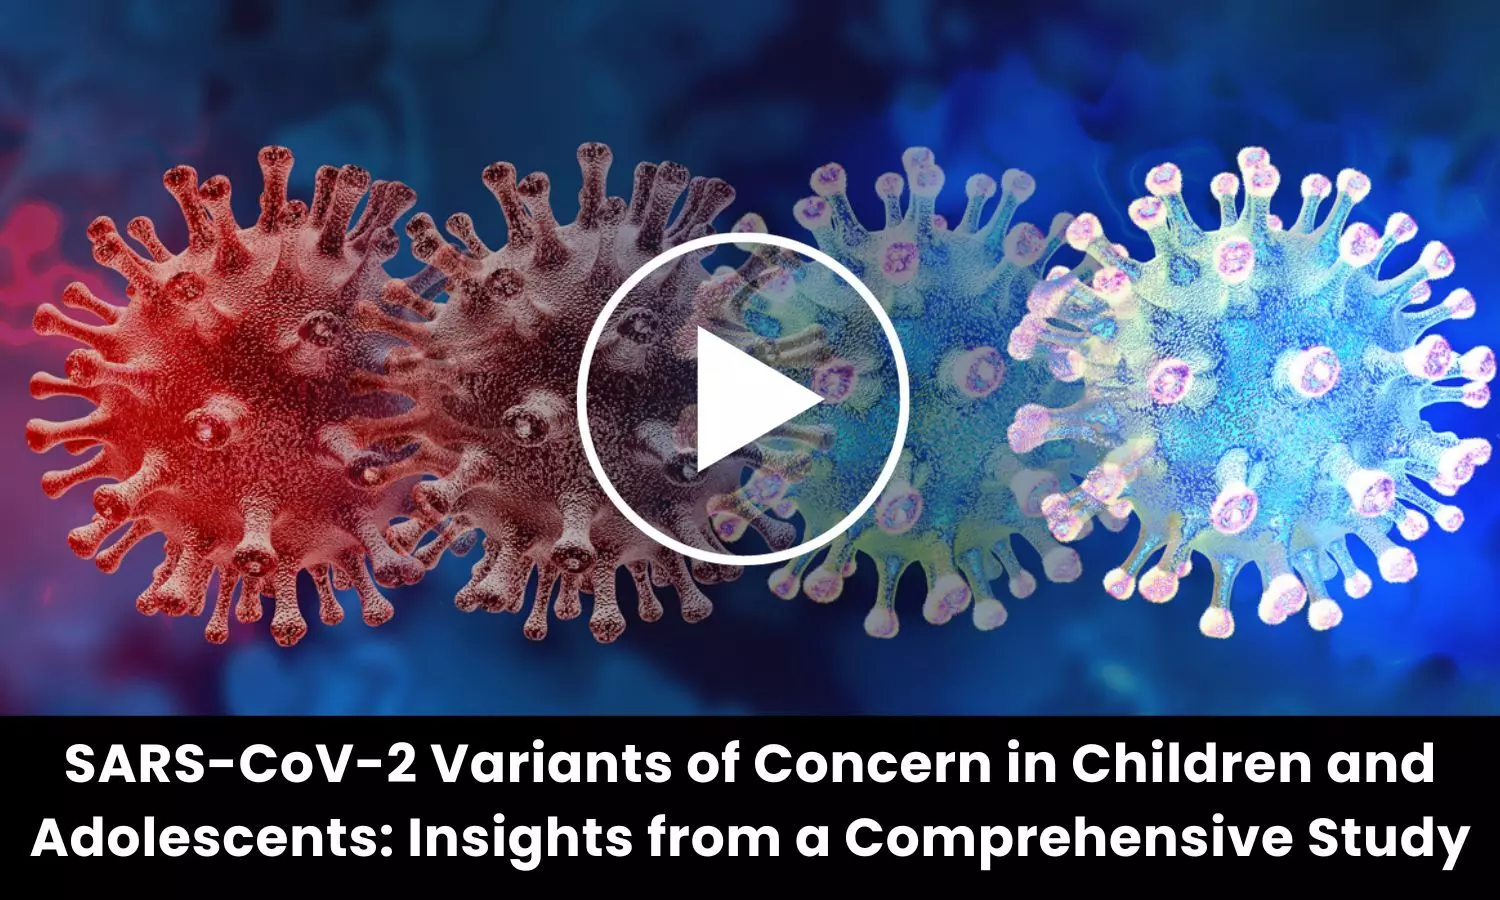 SARS-CoV-2 Variants of Concern in Children and Adolescents: Insights from a Comprehensive Study